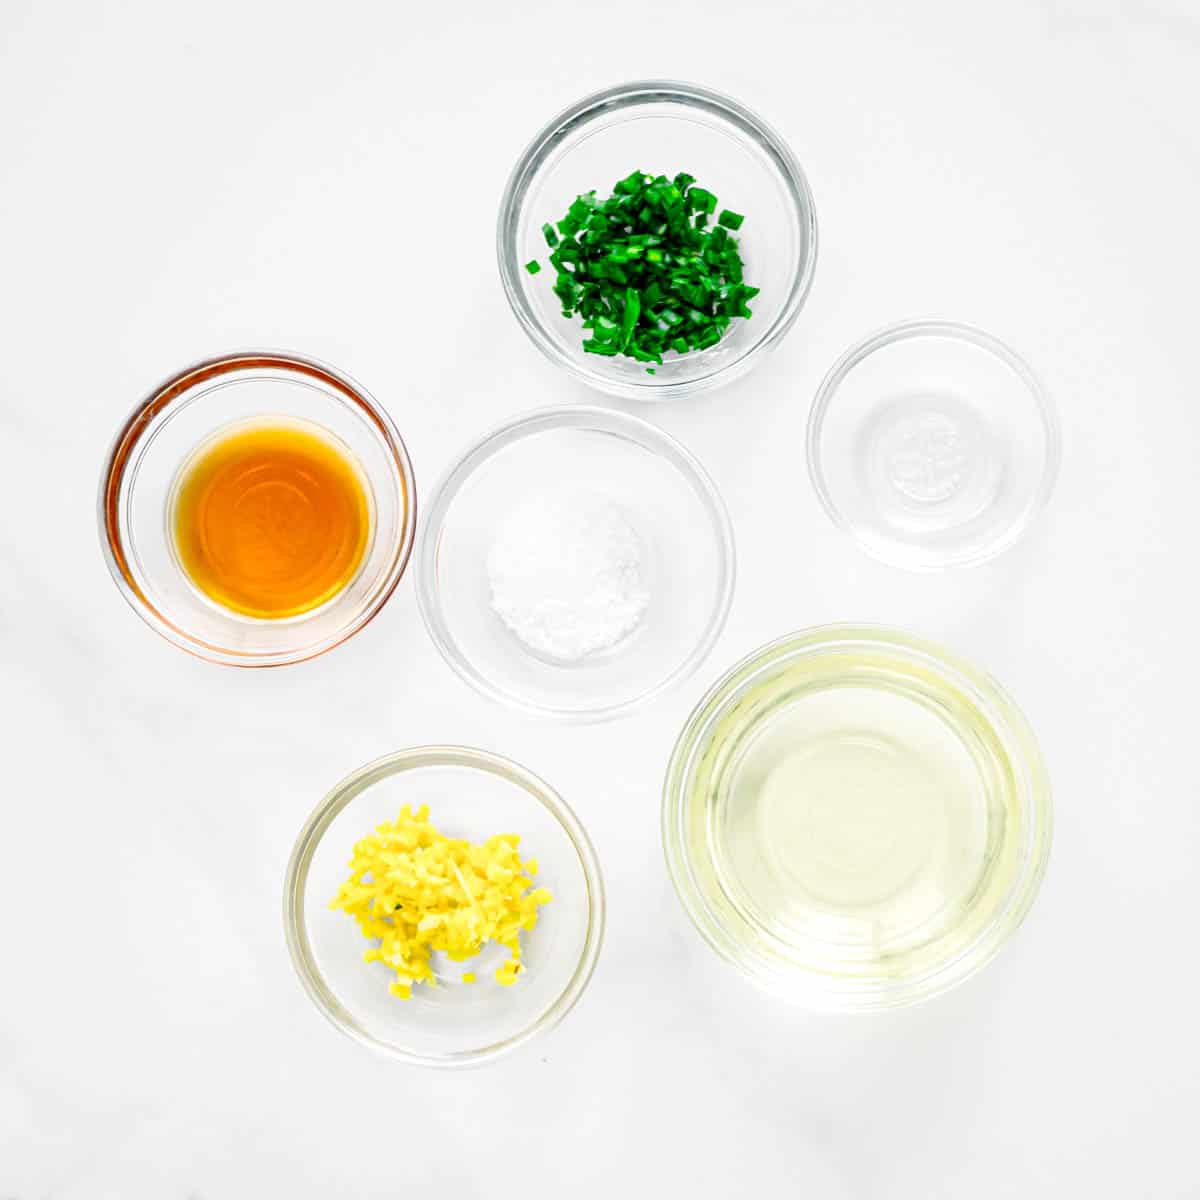 Ingredients for ginger scallion oil.